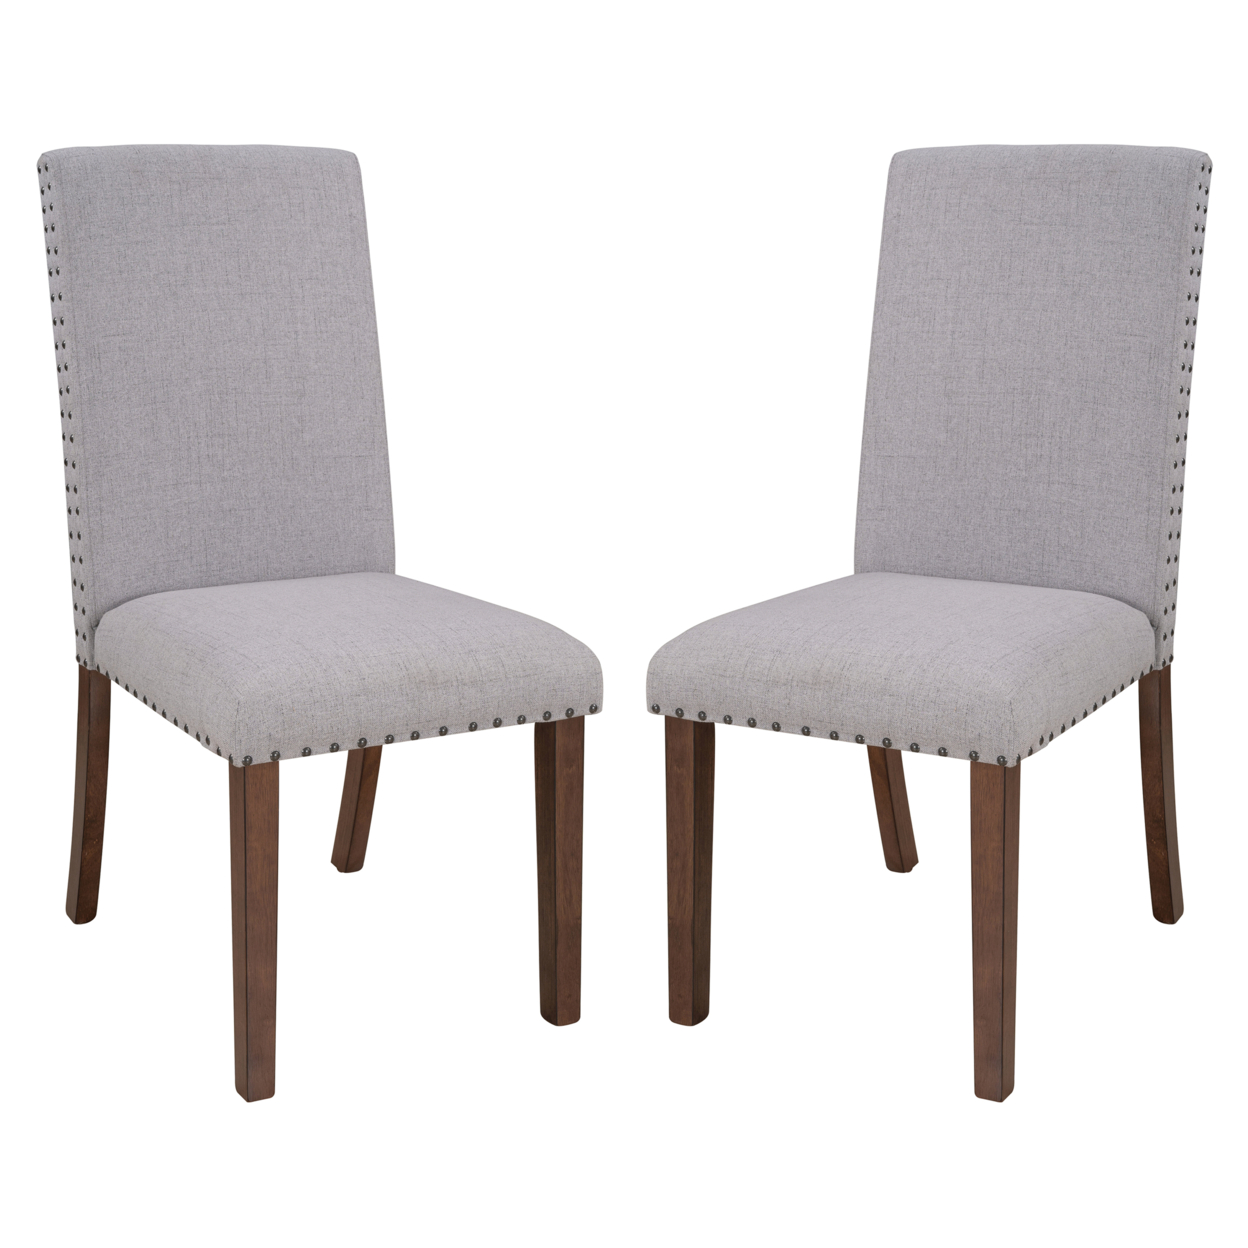 Side Chair With Fabric Seat And Nailhead Trim, Set Of 2, Gray- Saltoro Sherpi